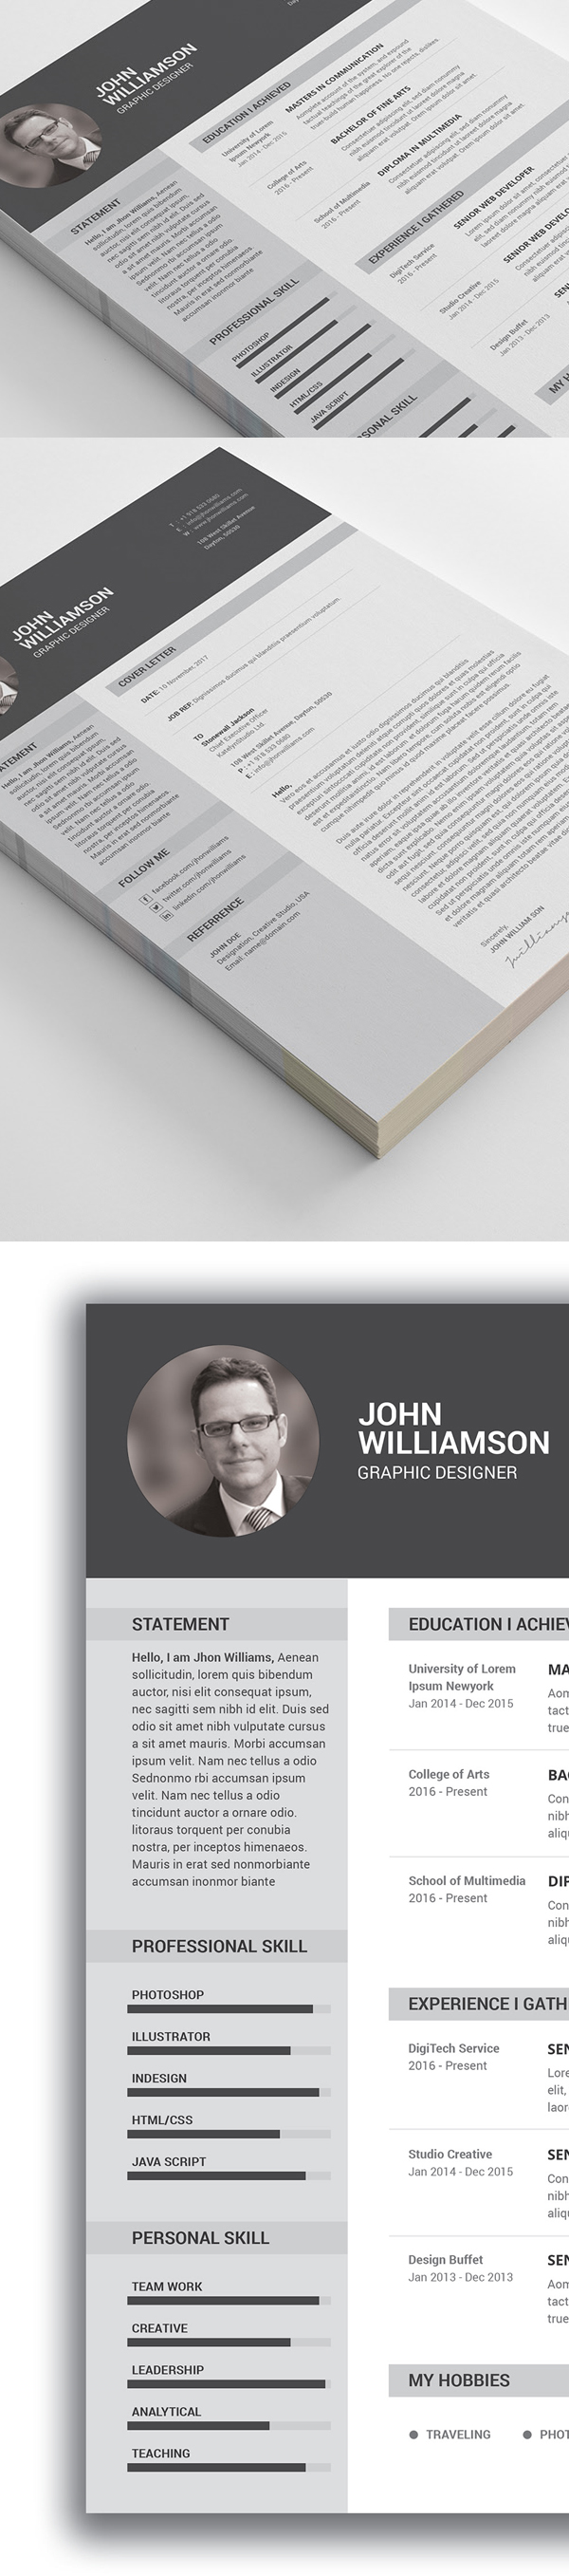 Minimal Free 2 Pages CV Resume Template and Cover Letter